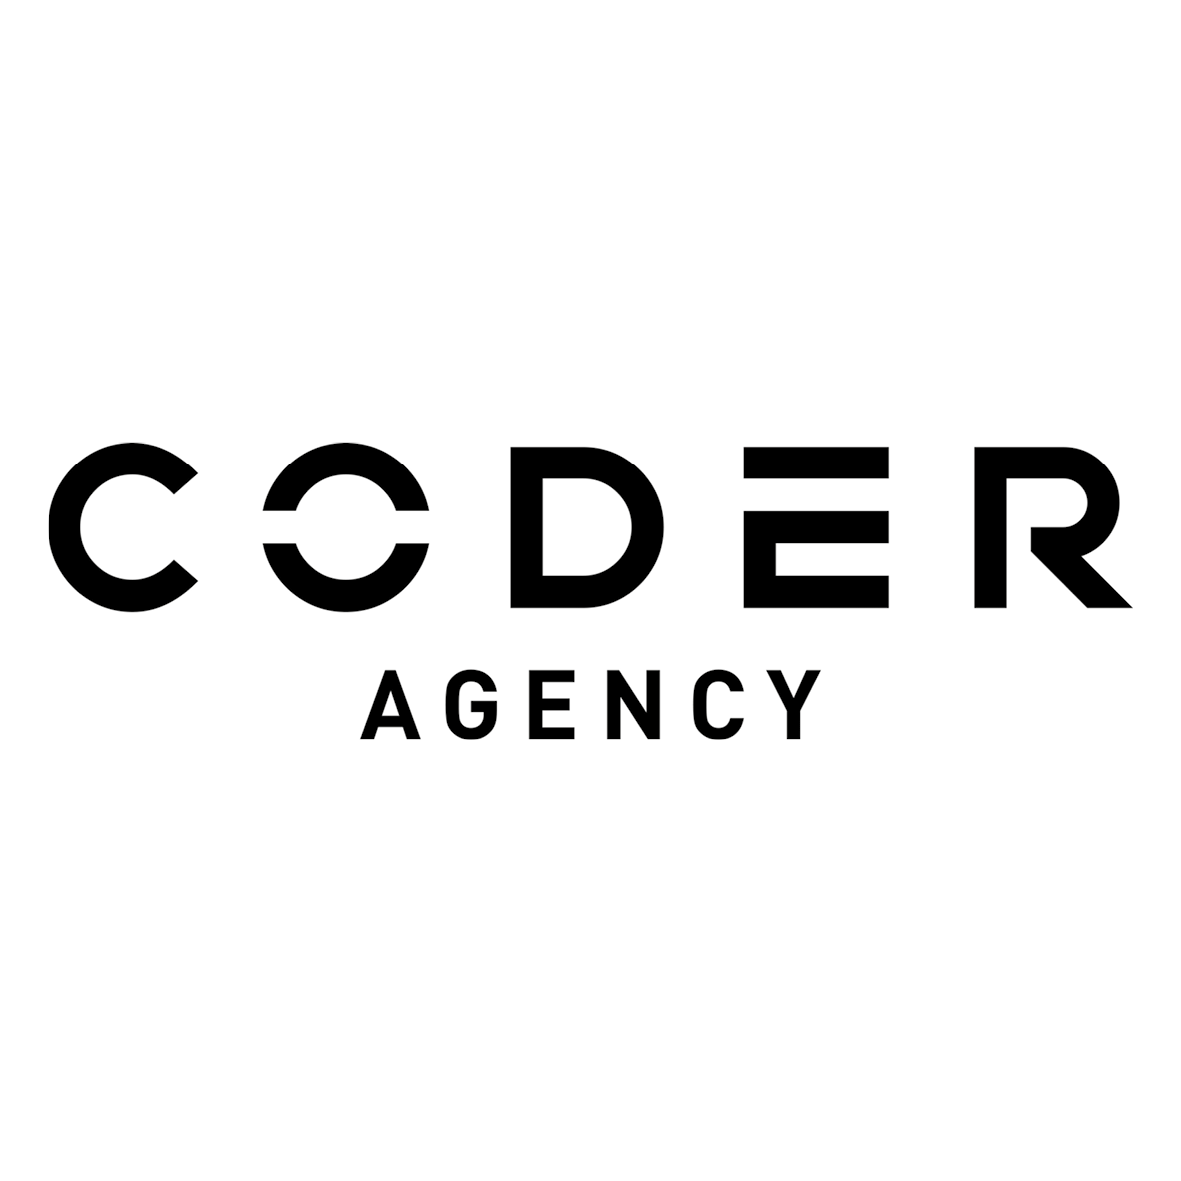 Link to http://coderagency.co.uk